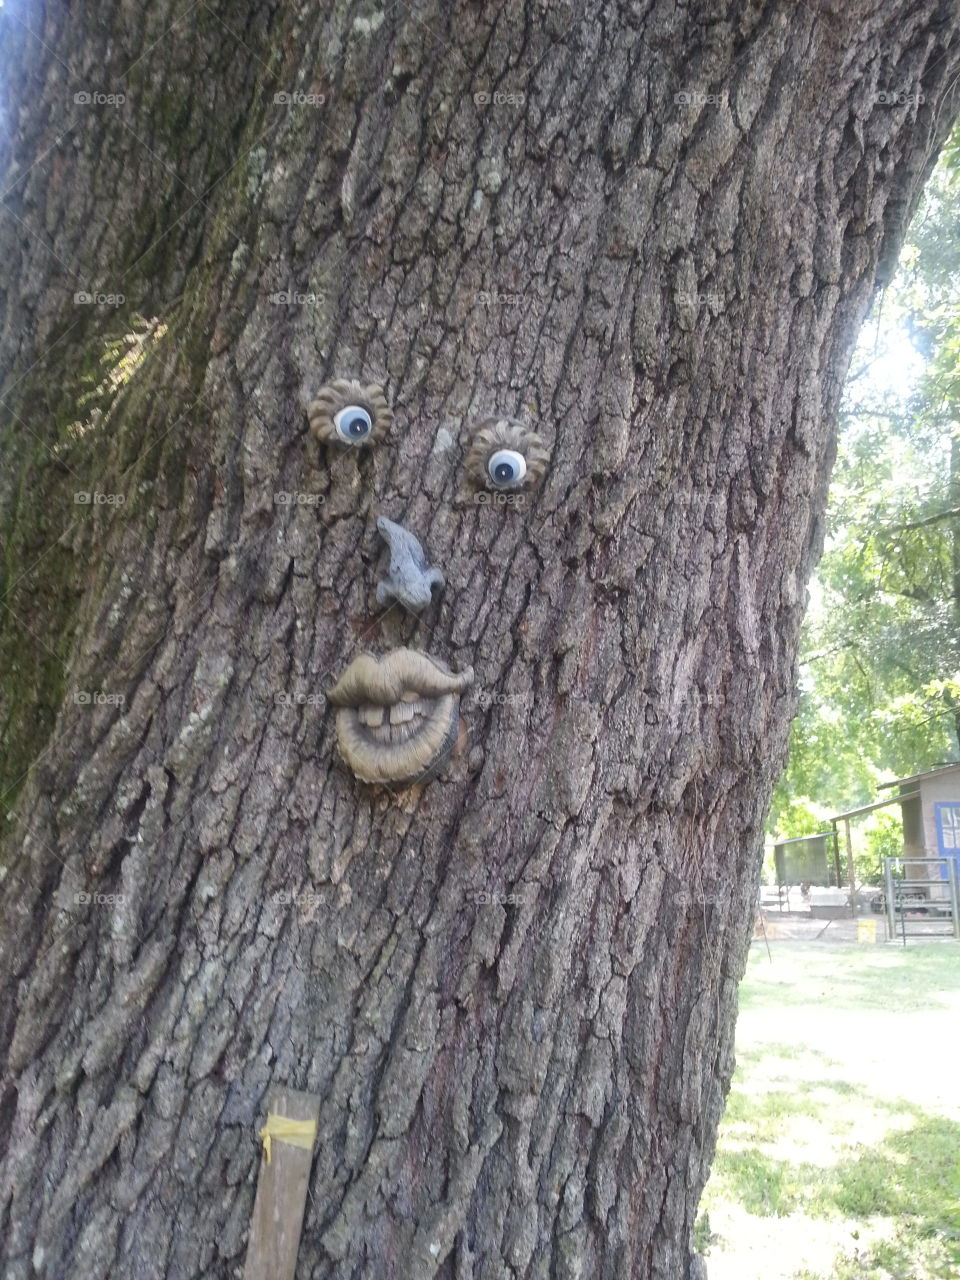 Face on tree. This is my in-laws face on their oak tree